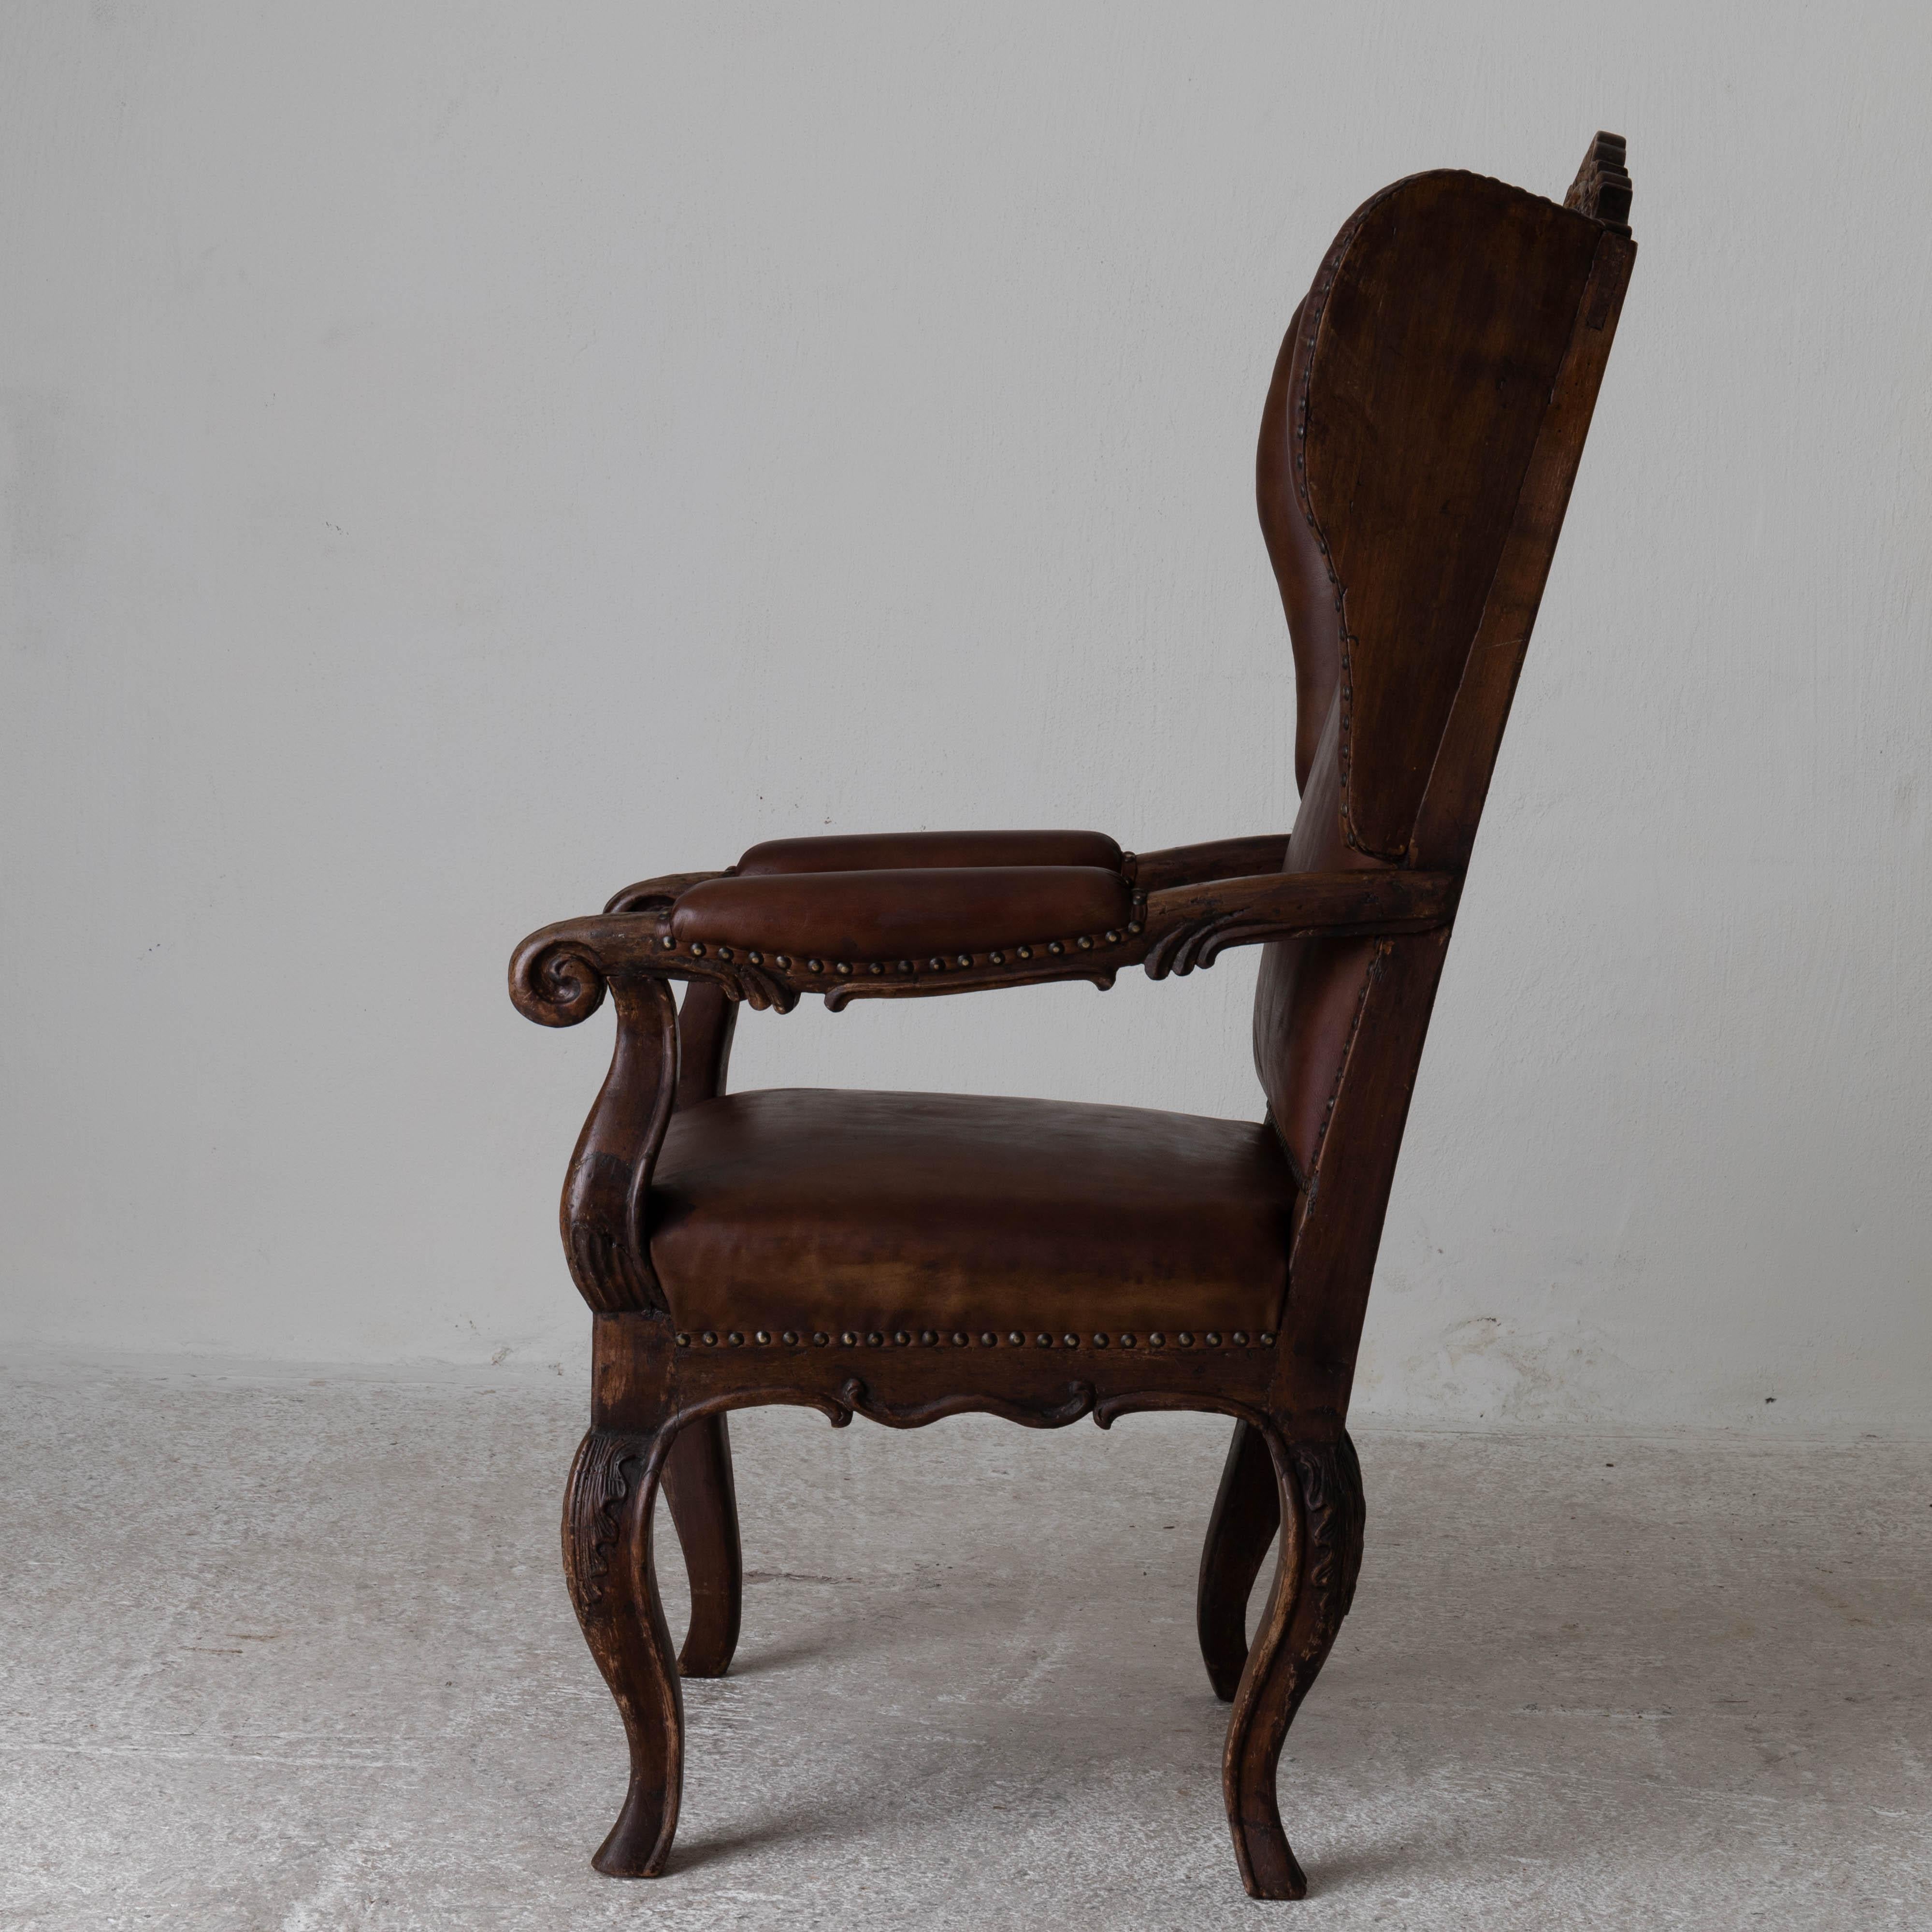 Chair wingback Swedish Rococo Period 1750-1775 Brown Leather Sweden. An exquisite wingback chair made during the Rococo Period in Sweden. Original finish and upholstered in a waxed brown leather. 

 